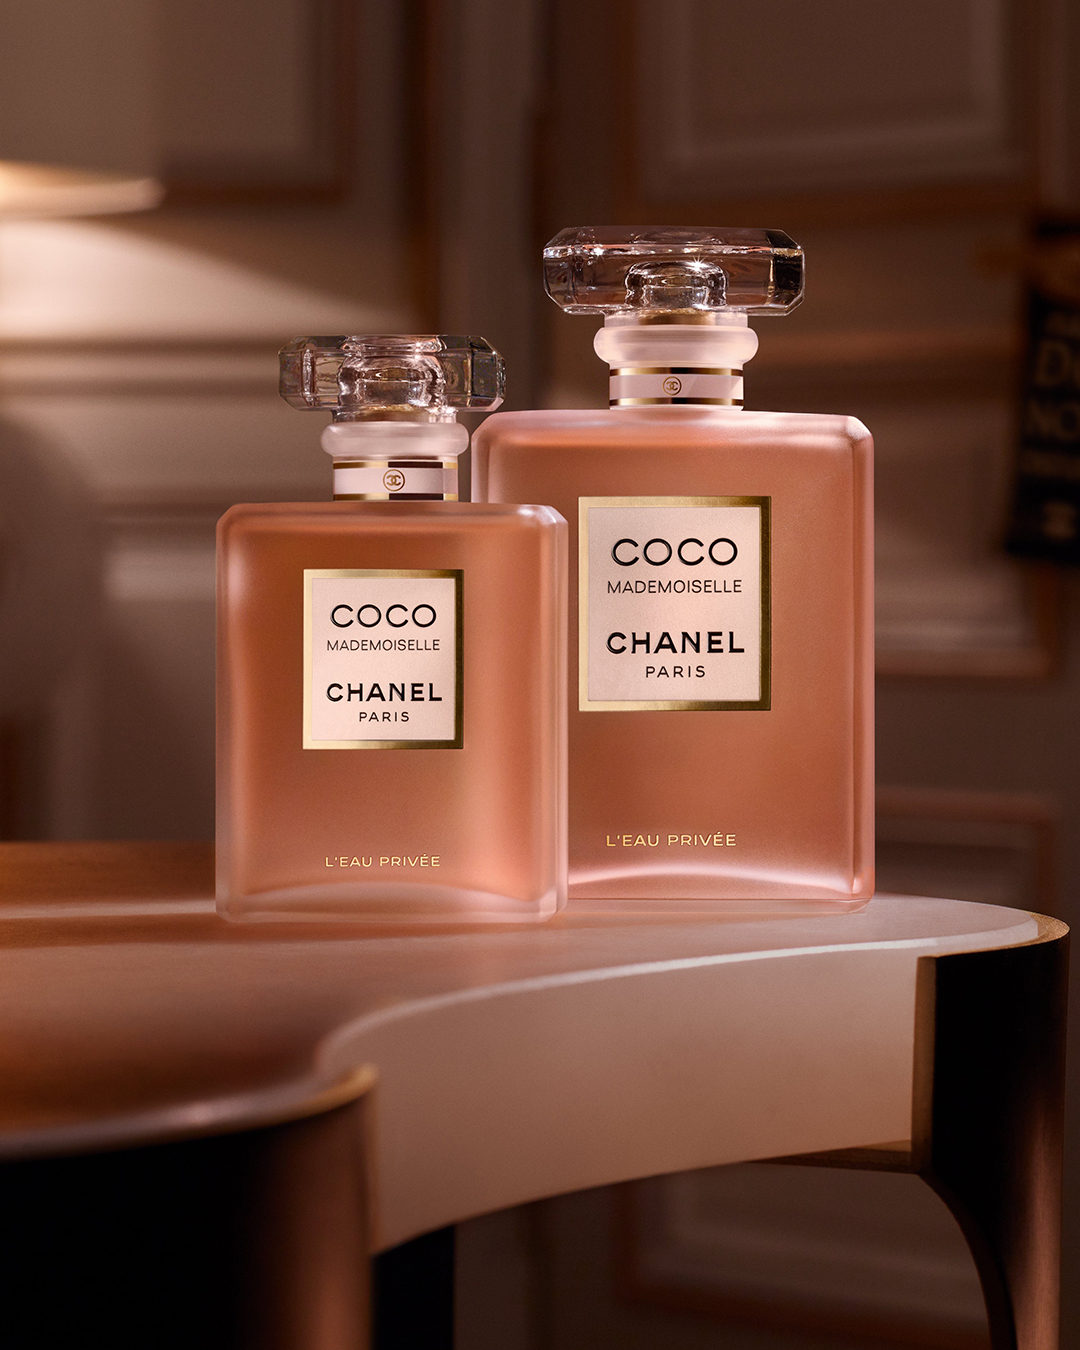 Sephora on X: "New from @chanel—discover COCO MADEMOISELLE L'EAU PRIVÉE,  the soft-floral fragrance that's perfect for a night in.  https://t.co/vkjRCCSByc https://t.co/cxpyWzxZV1" / X